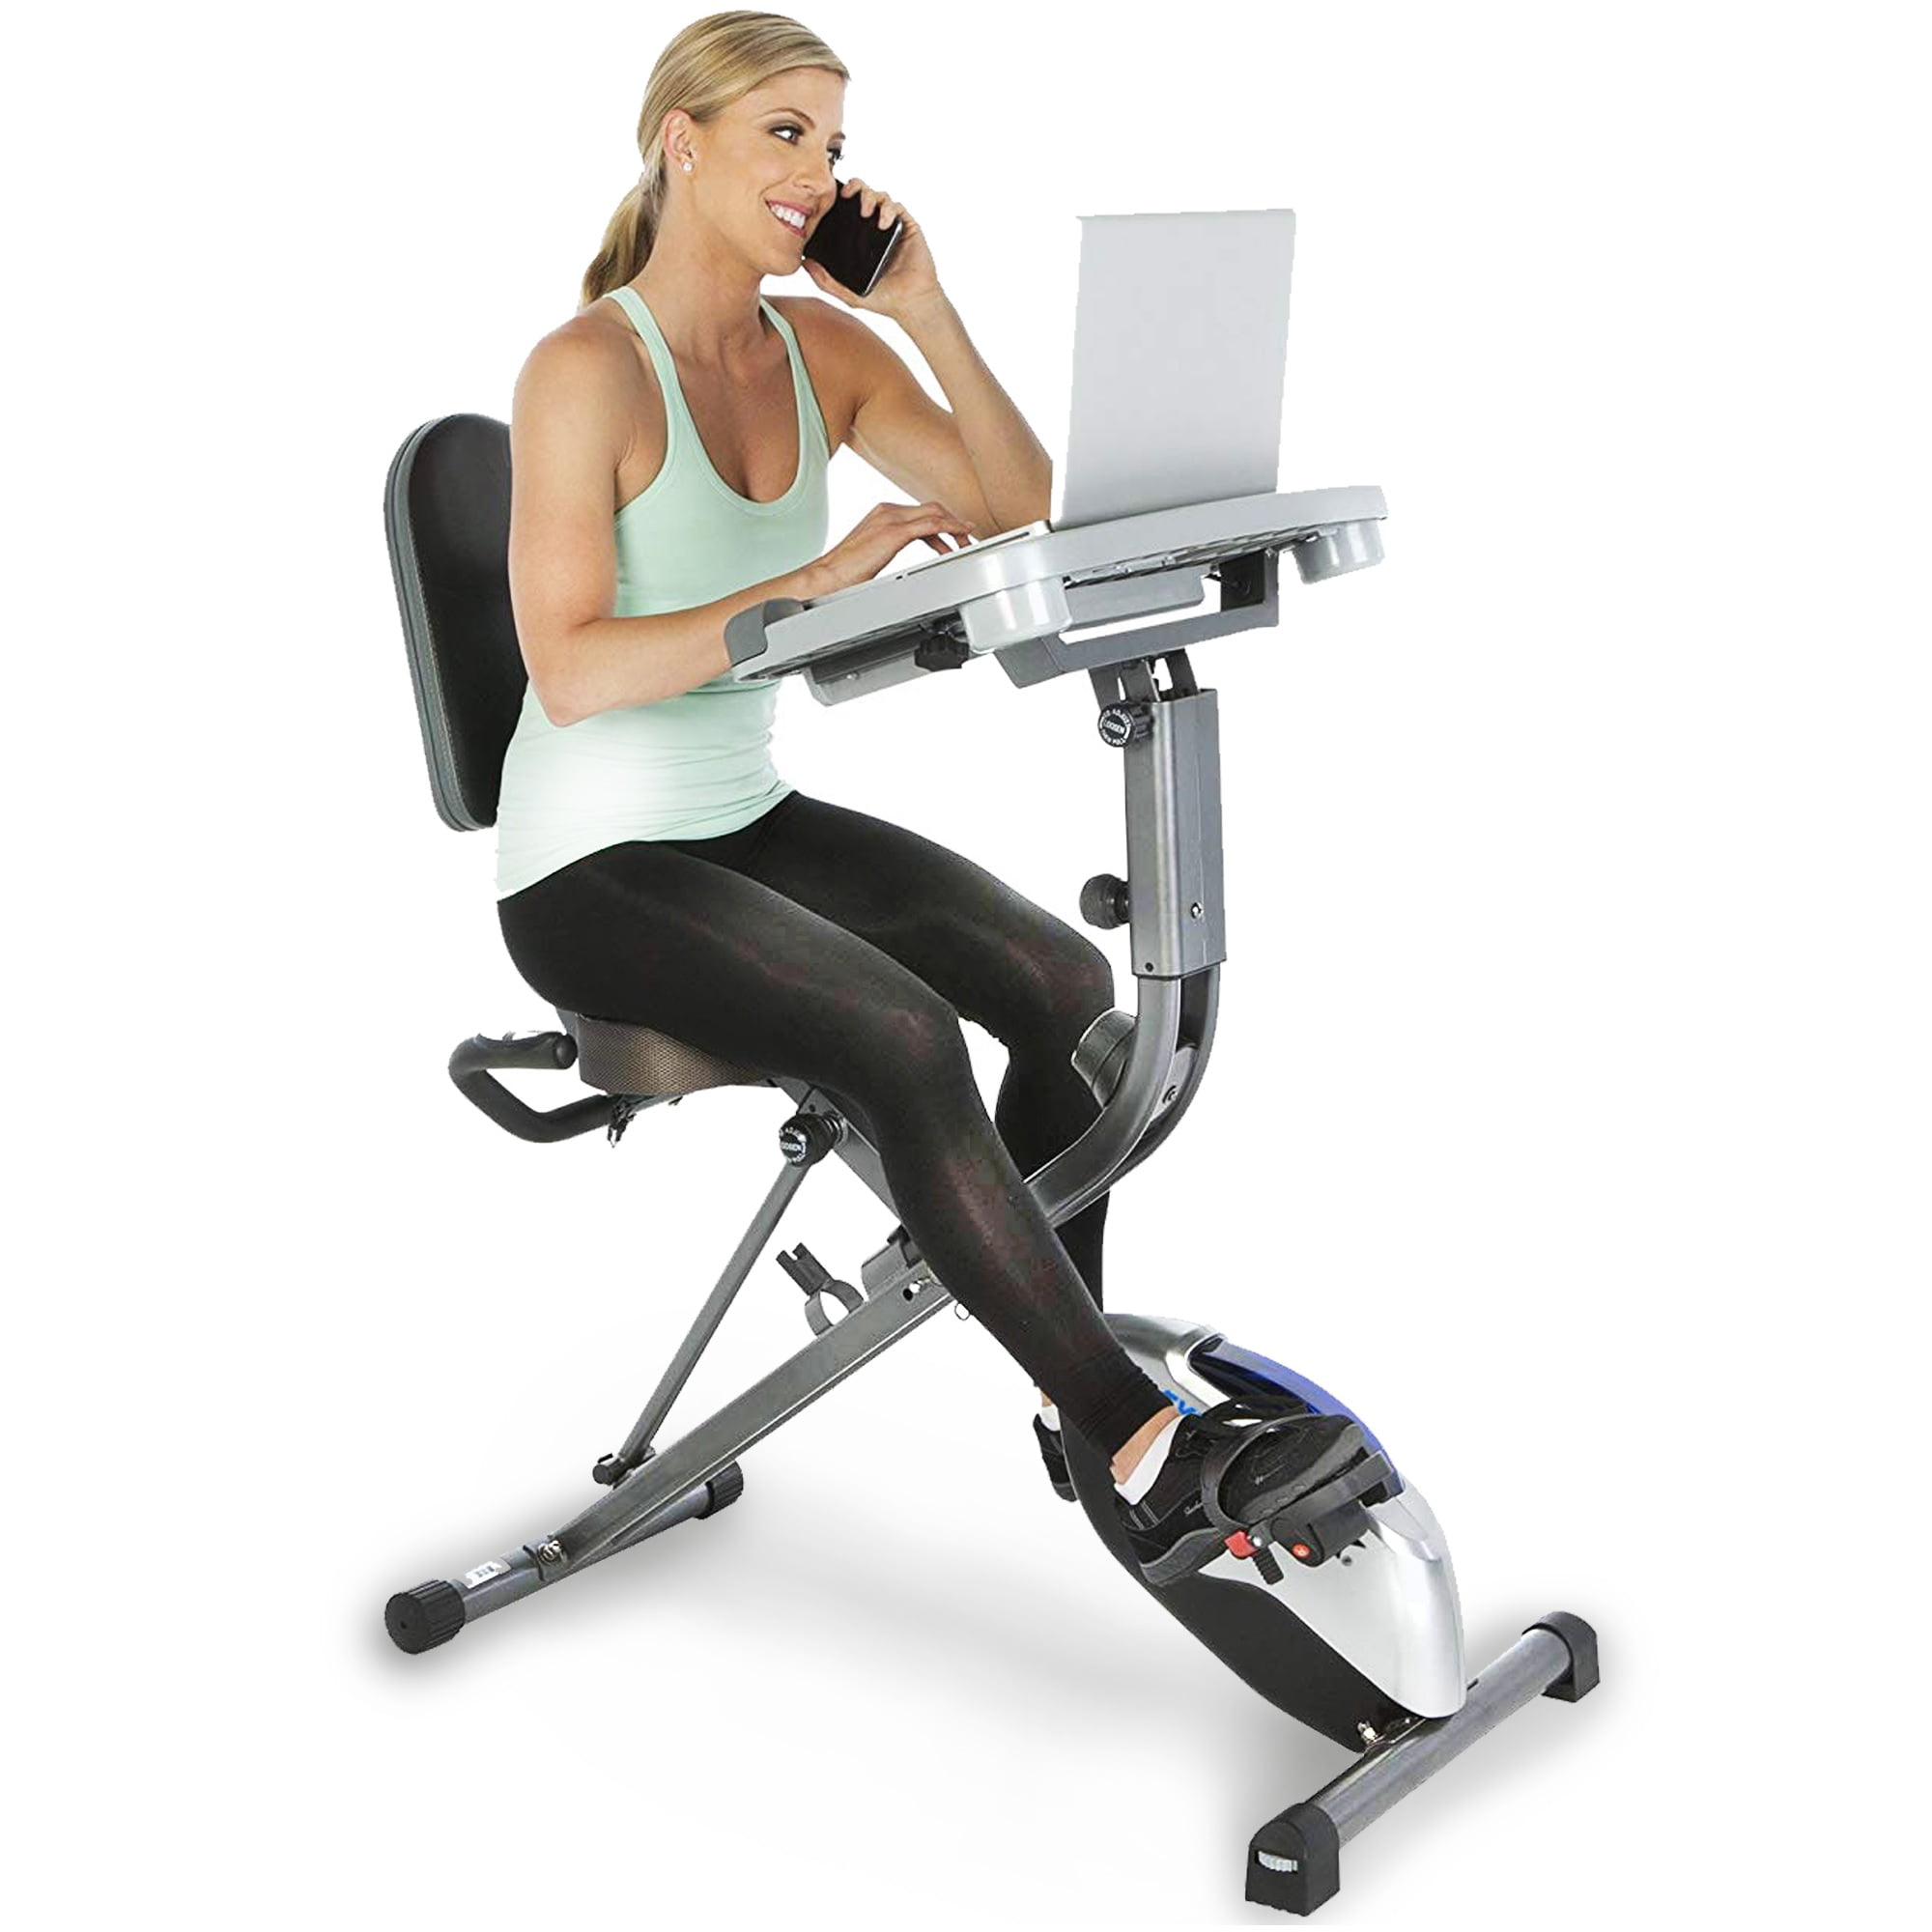 2-in-1 Health Fitness Exercise Bike Workstation and Standing Desk Computer Table 